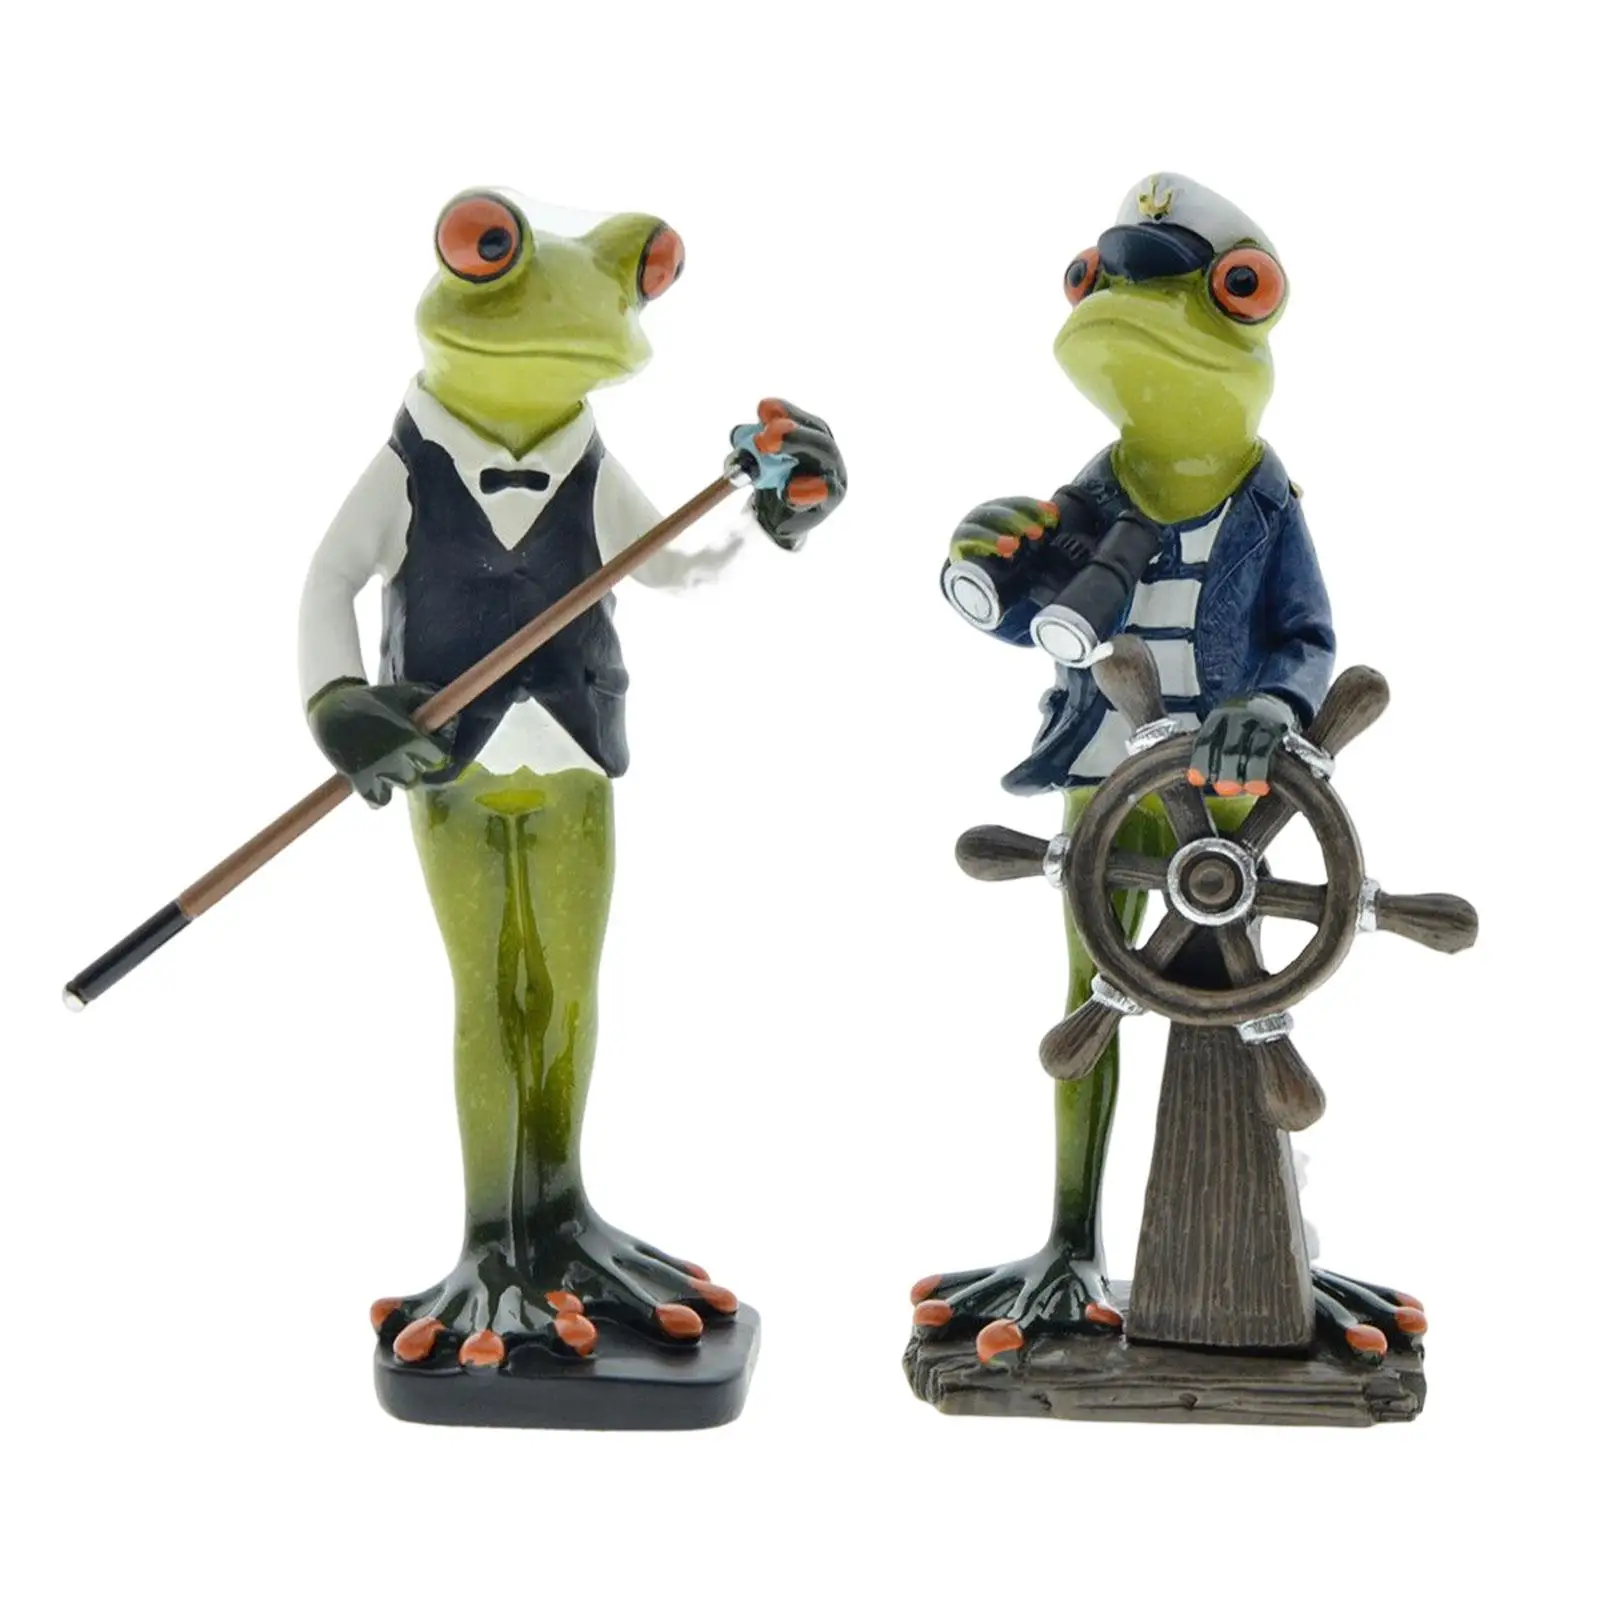 Miniature Frog Figurines Ornaments 3D Resin Animal Snooker Player Statue for Lawn Tabletop Fairy Garden Patio Decor